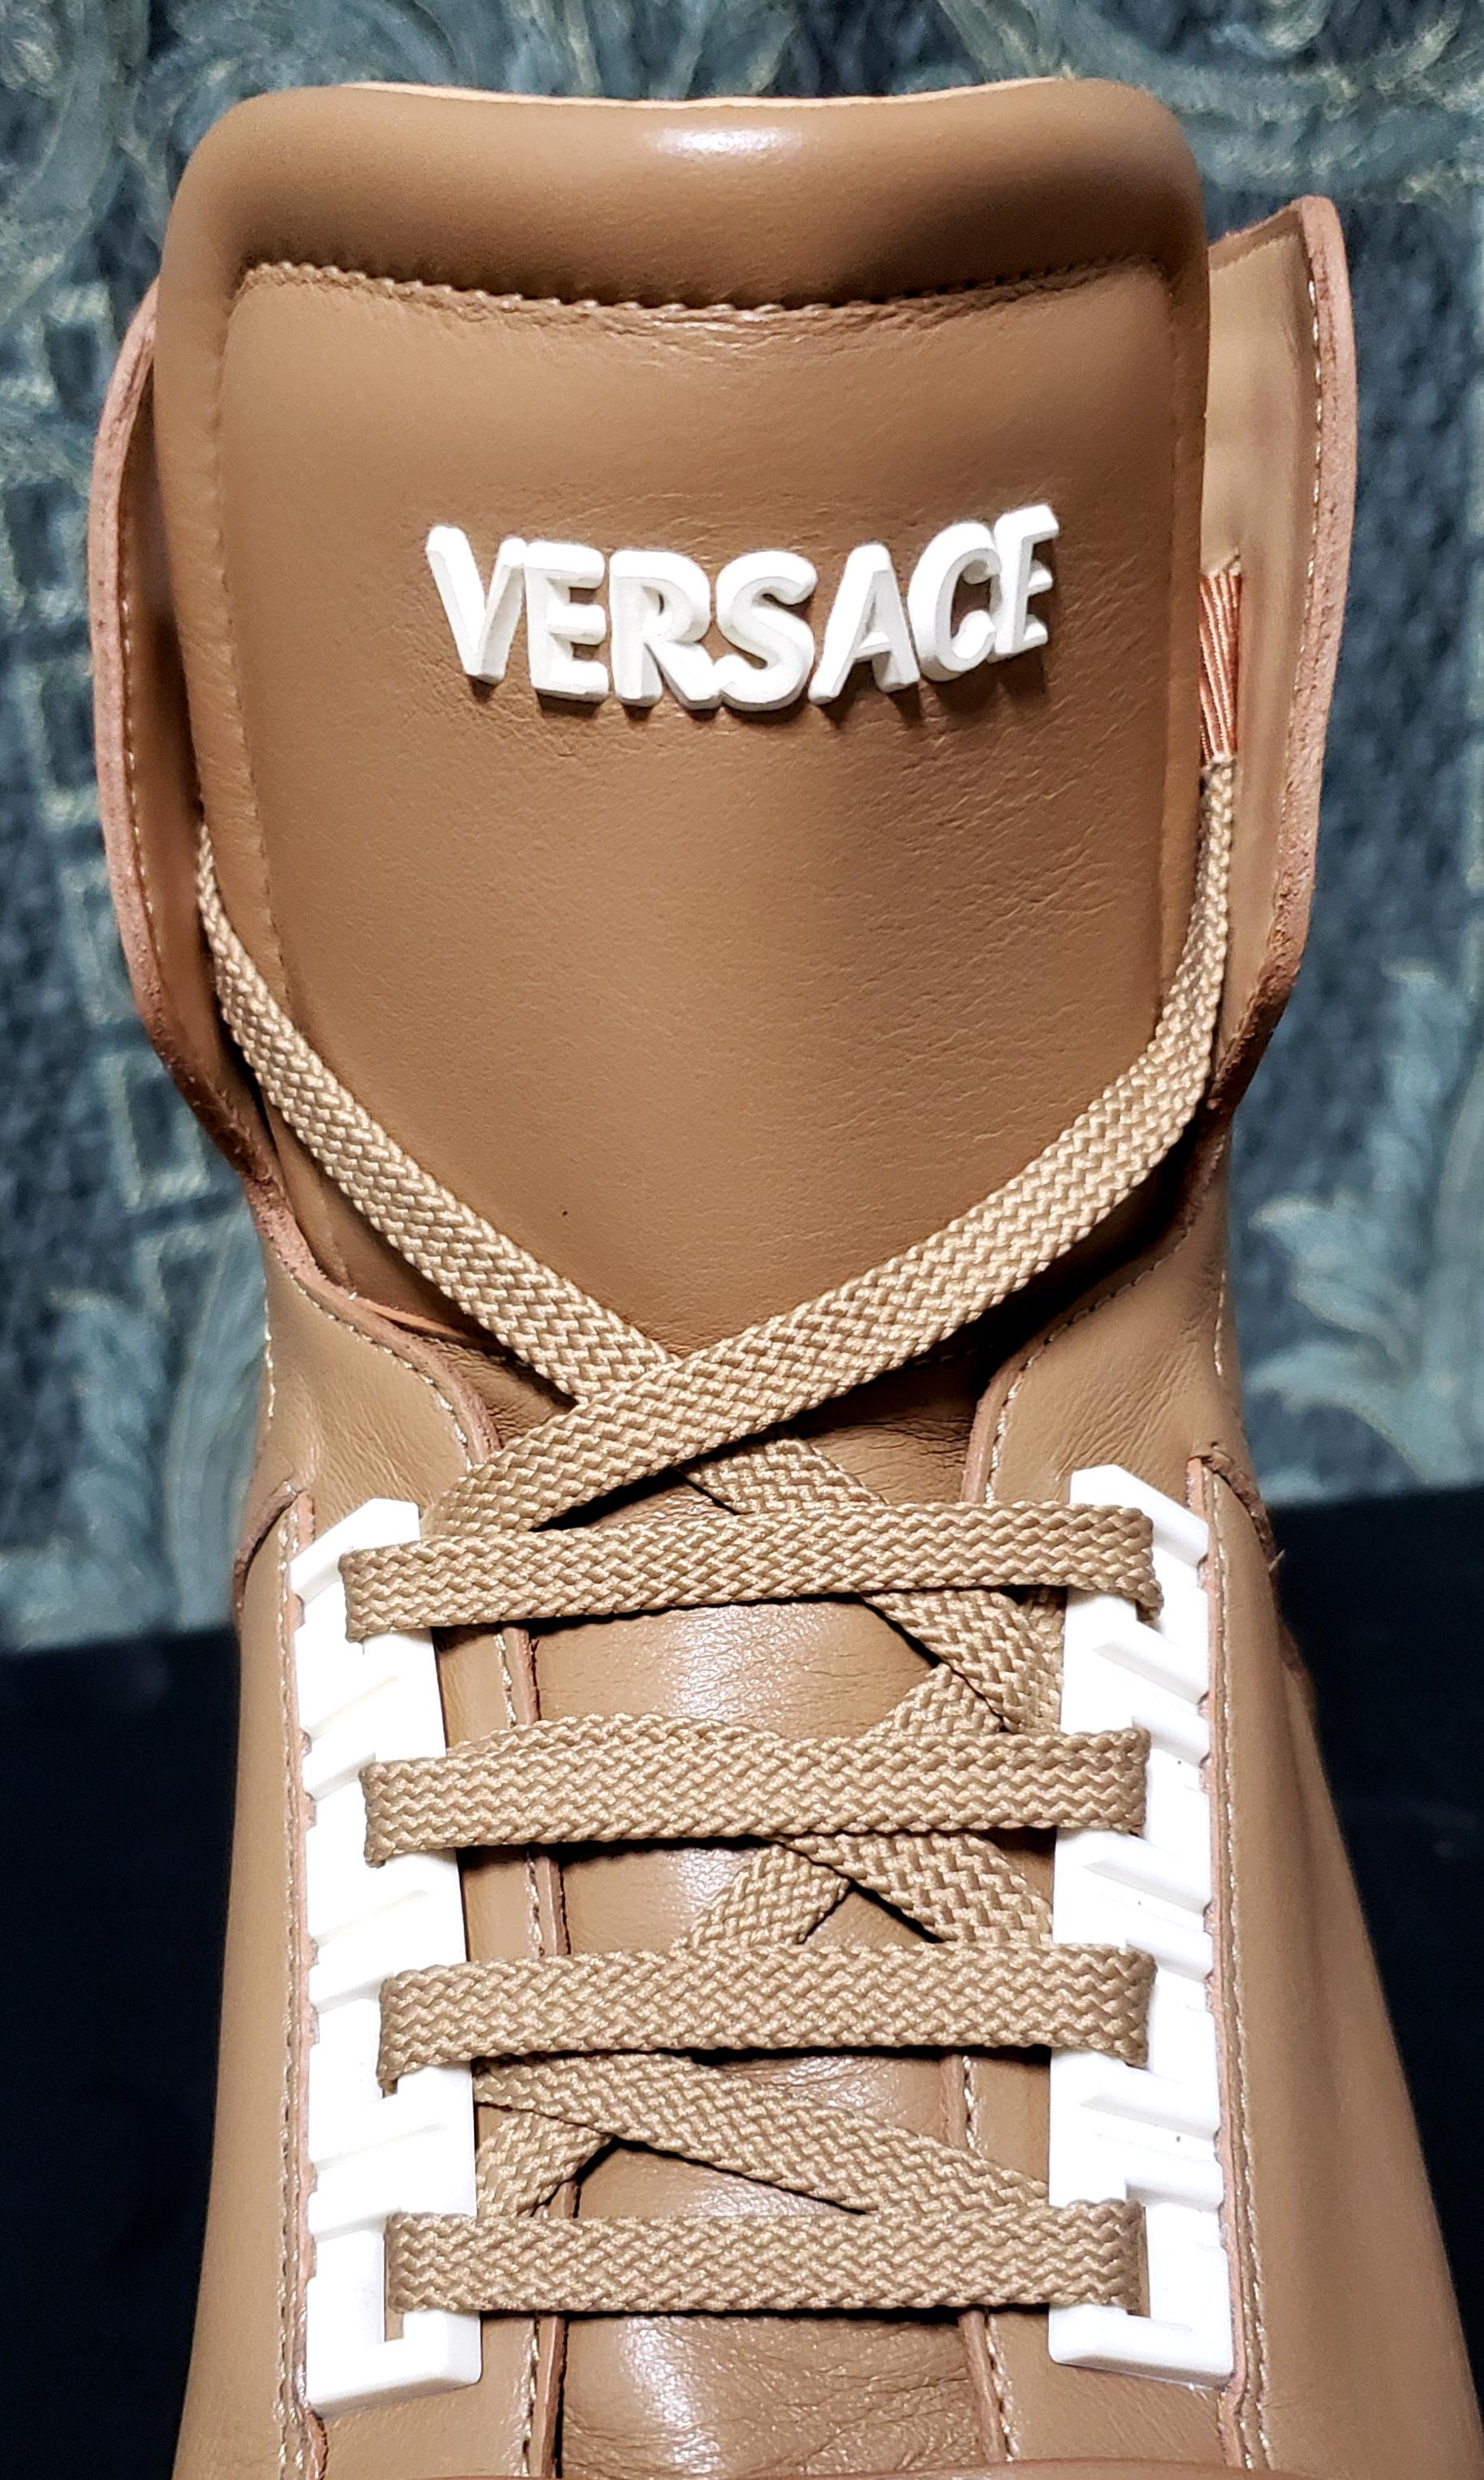 New VERSACE HIGH -TOP MOCHA LEATHER LACE UP SNEAKERS 44 - 11 5